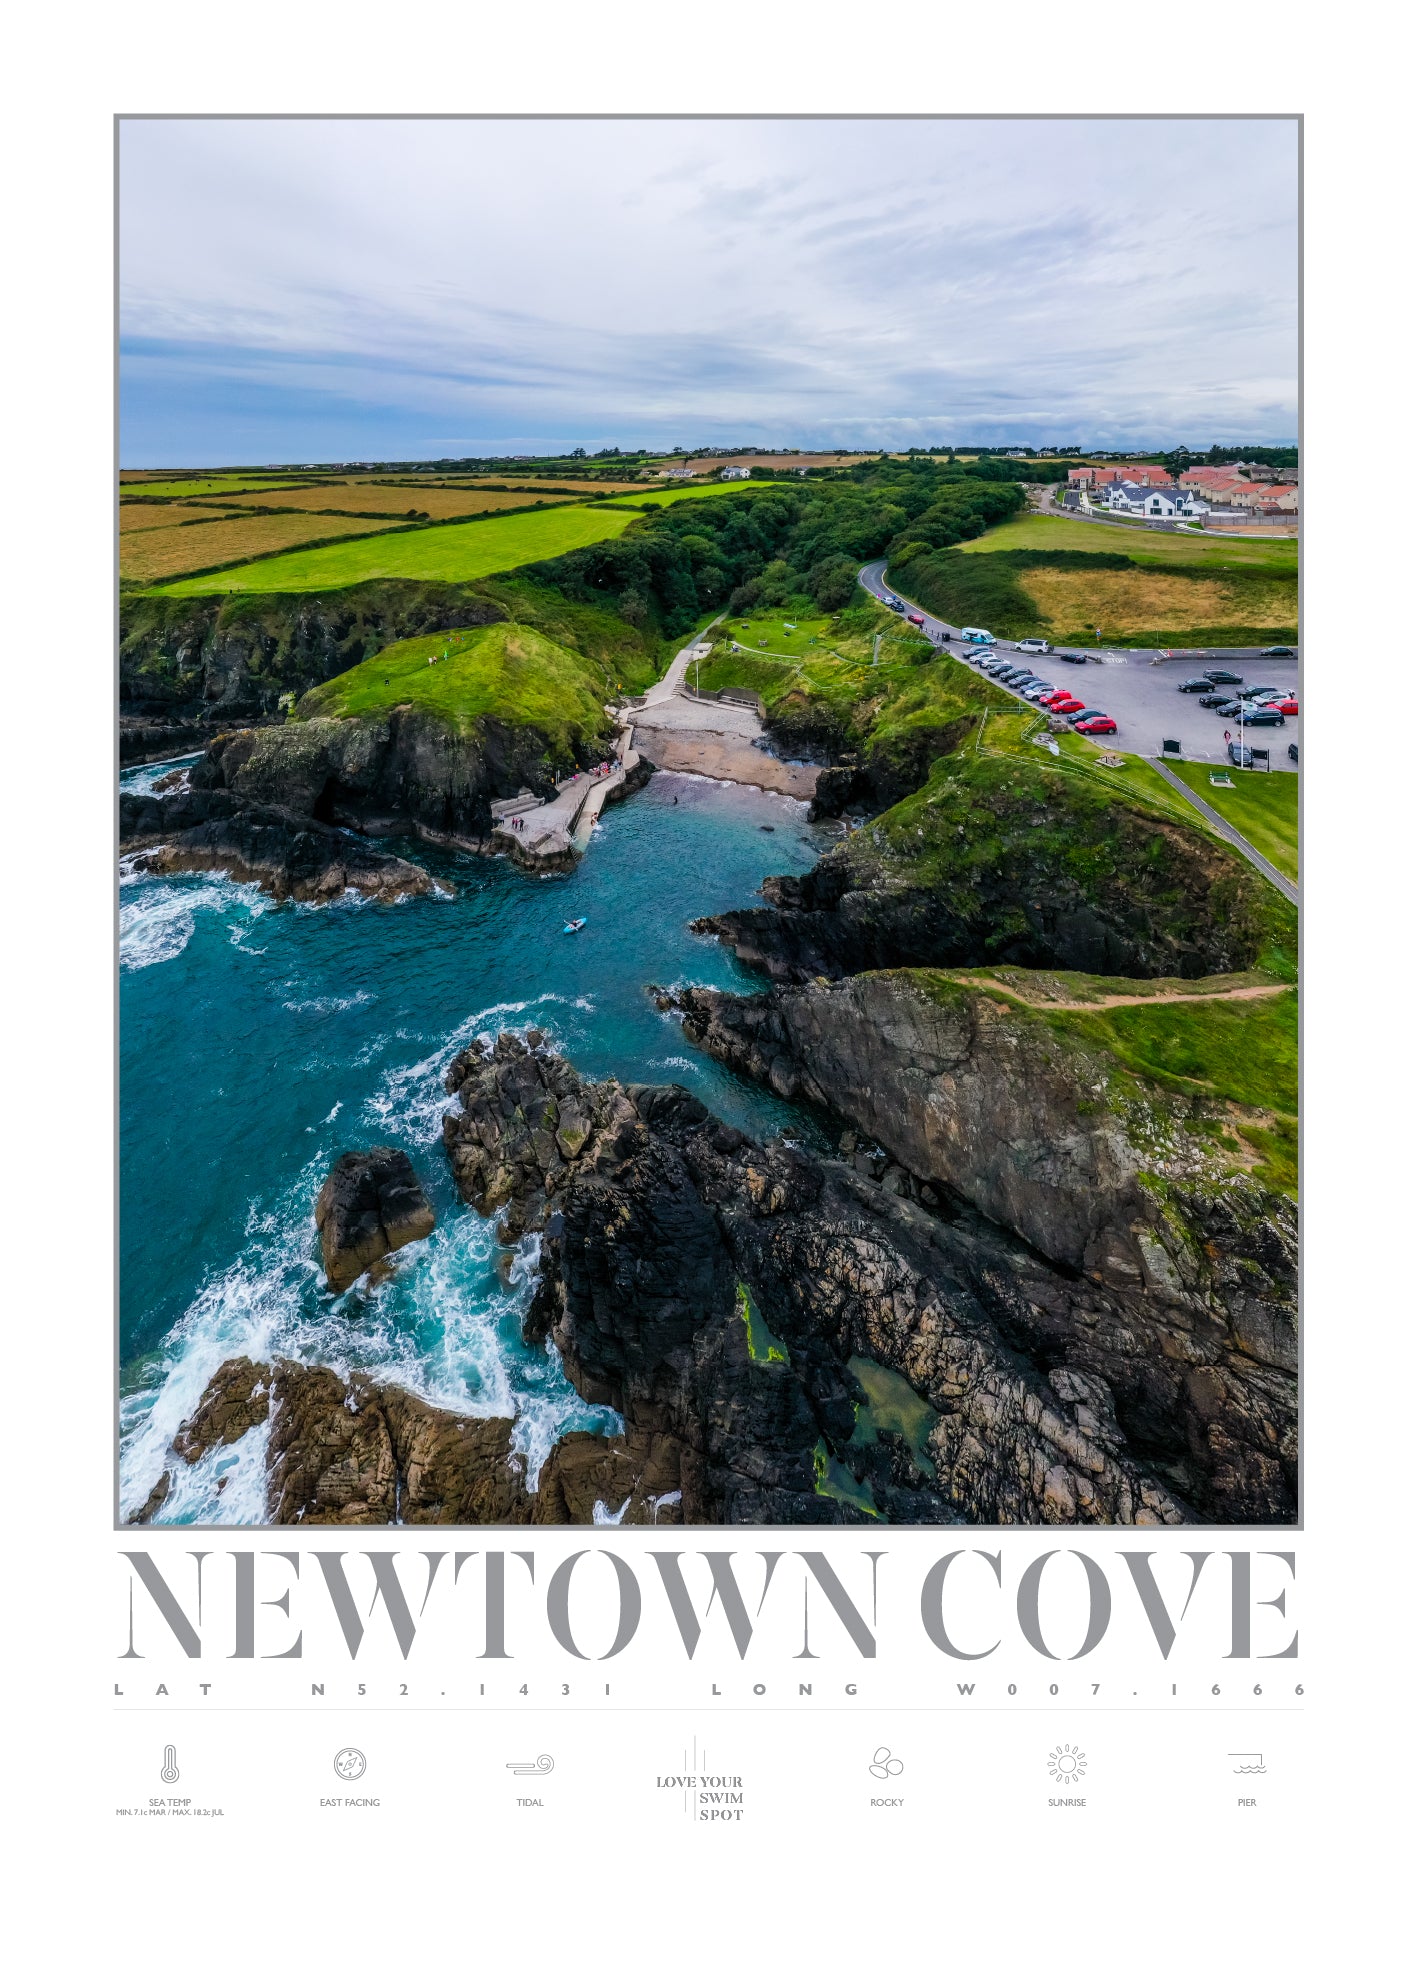 NEWTOWN COVE WATERFORD